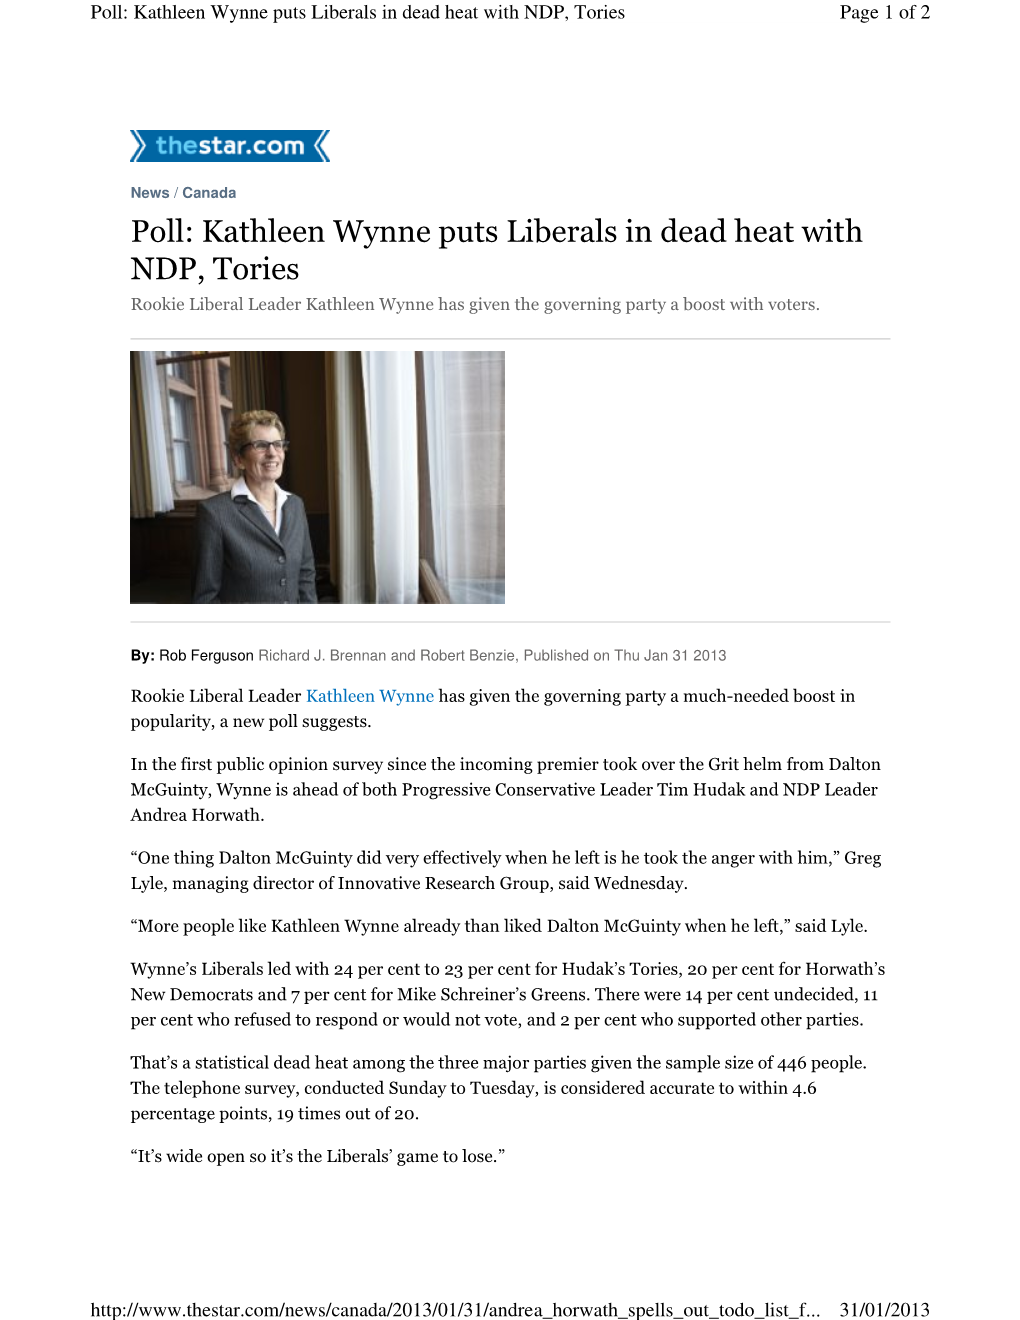 Kathleen Wynne Puts Liberals in Dead Heat with NDP, Tories Page 1 of 2